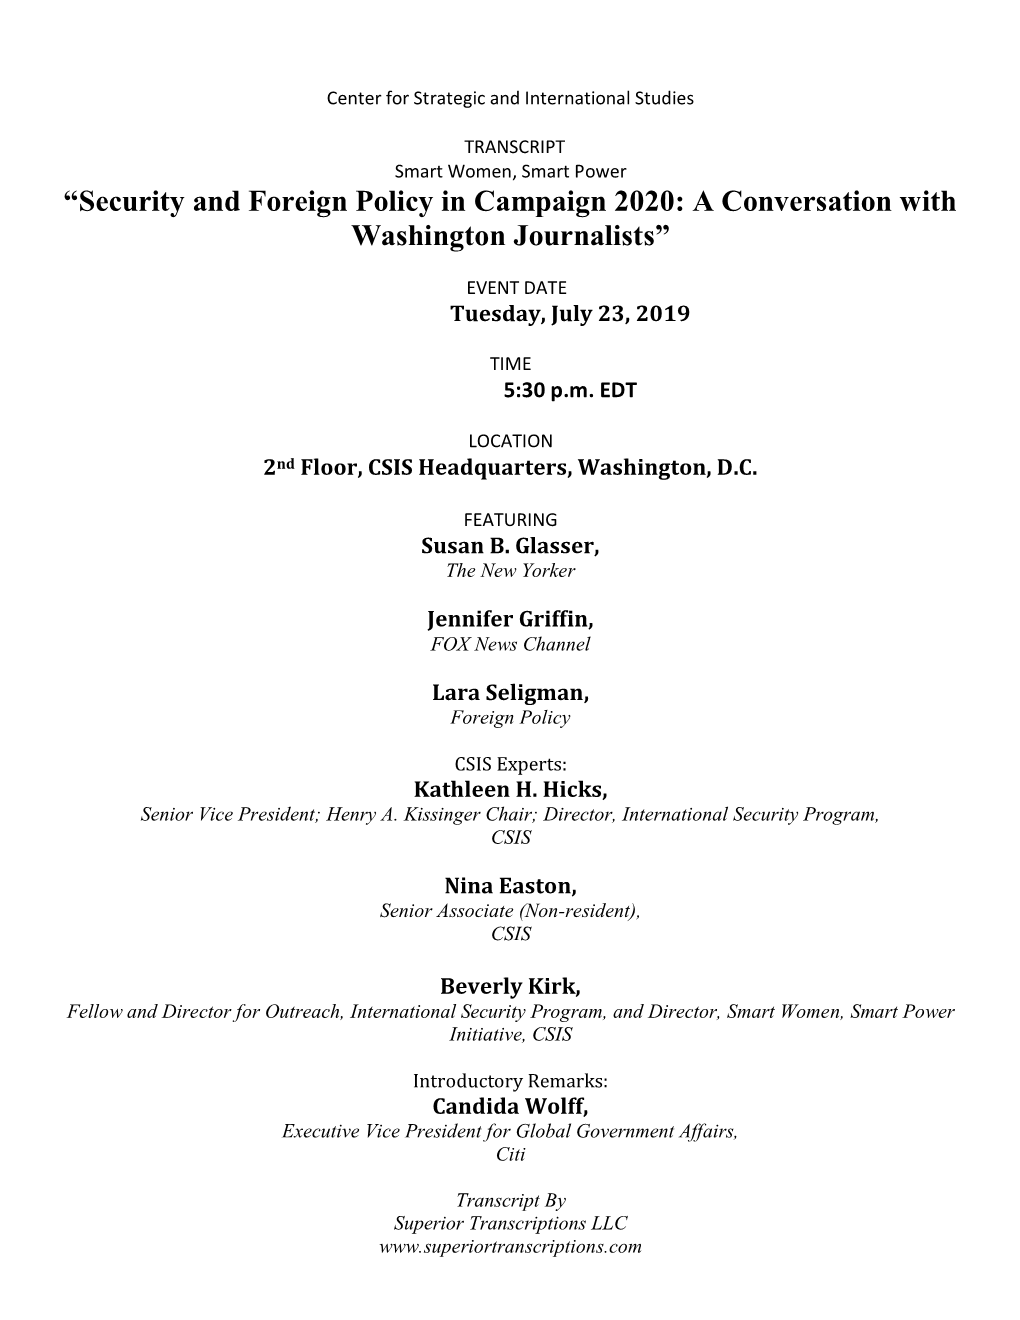 Security and Foreign Policy in Campaign 2020: a Conversation with Washington Journalists”